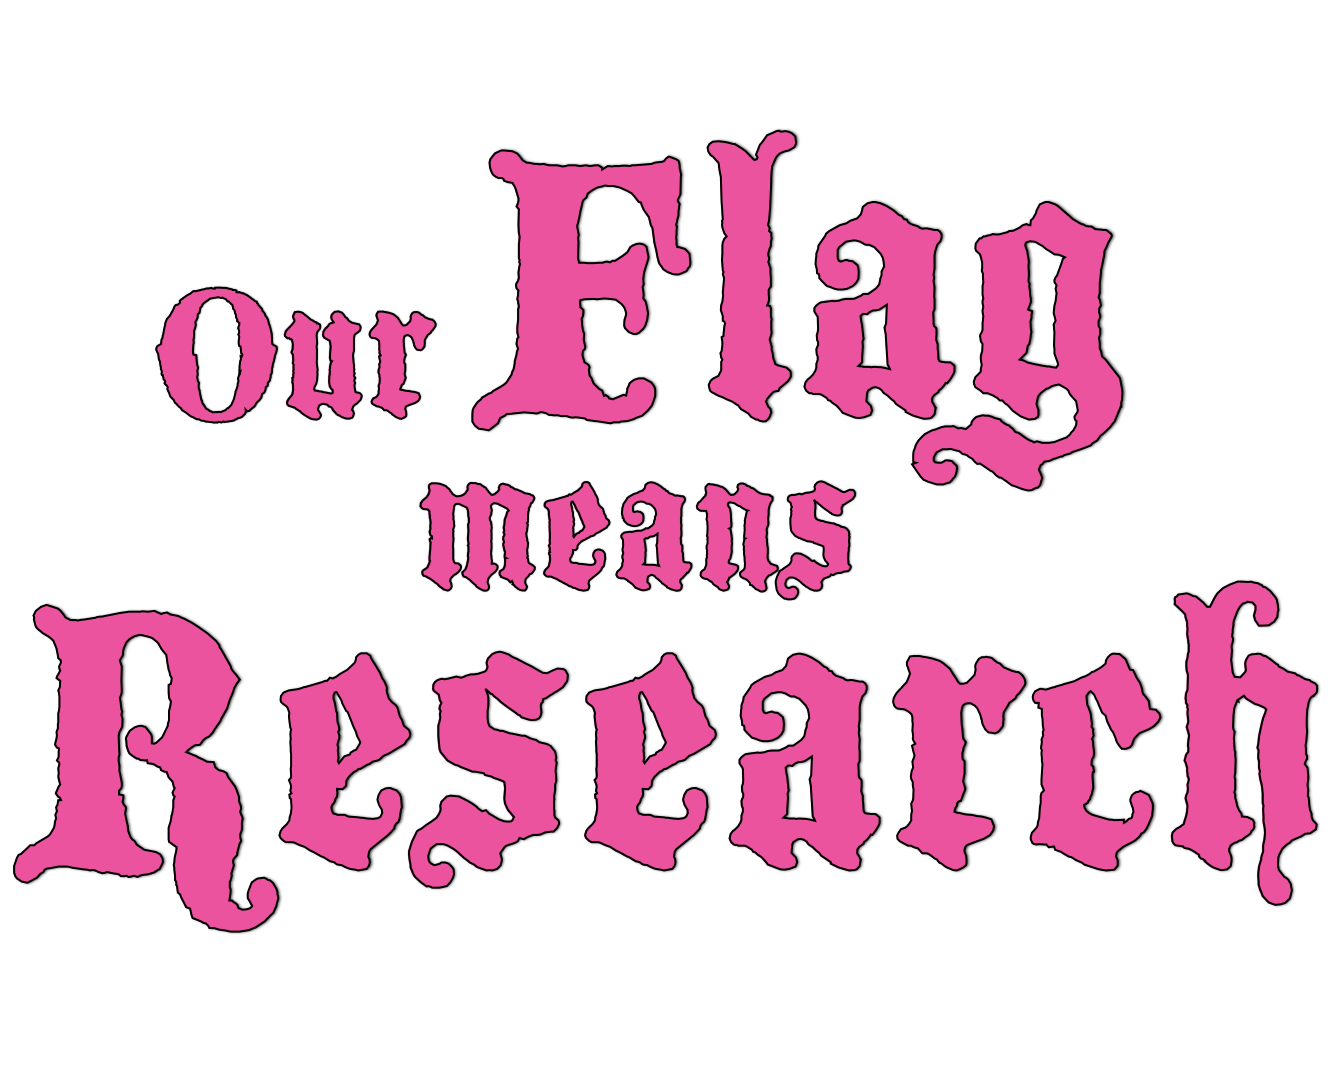 Our Flag Means Research